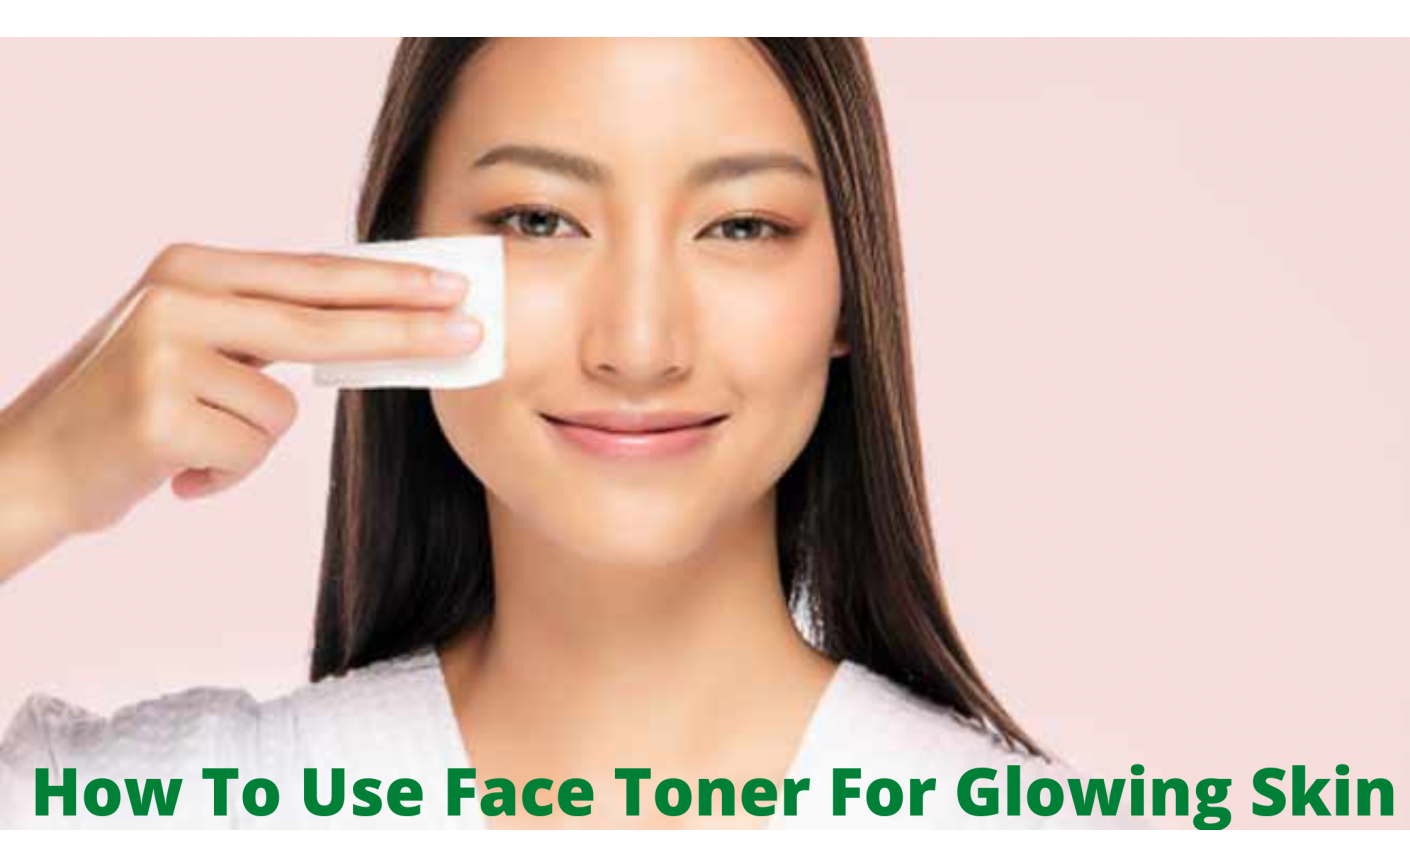 How To Use Face Toner For Glowing Skin